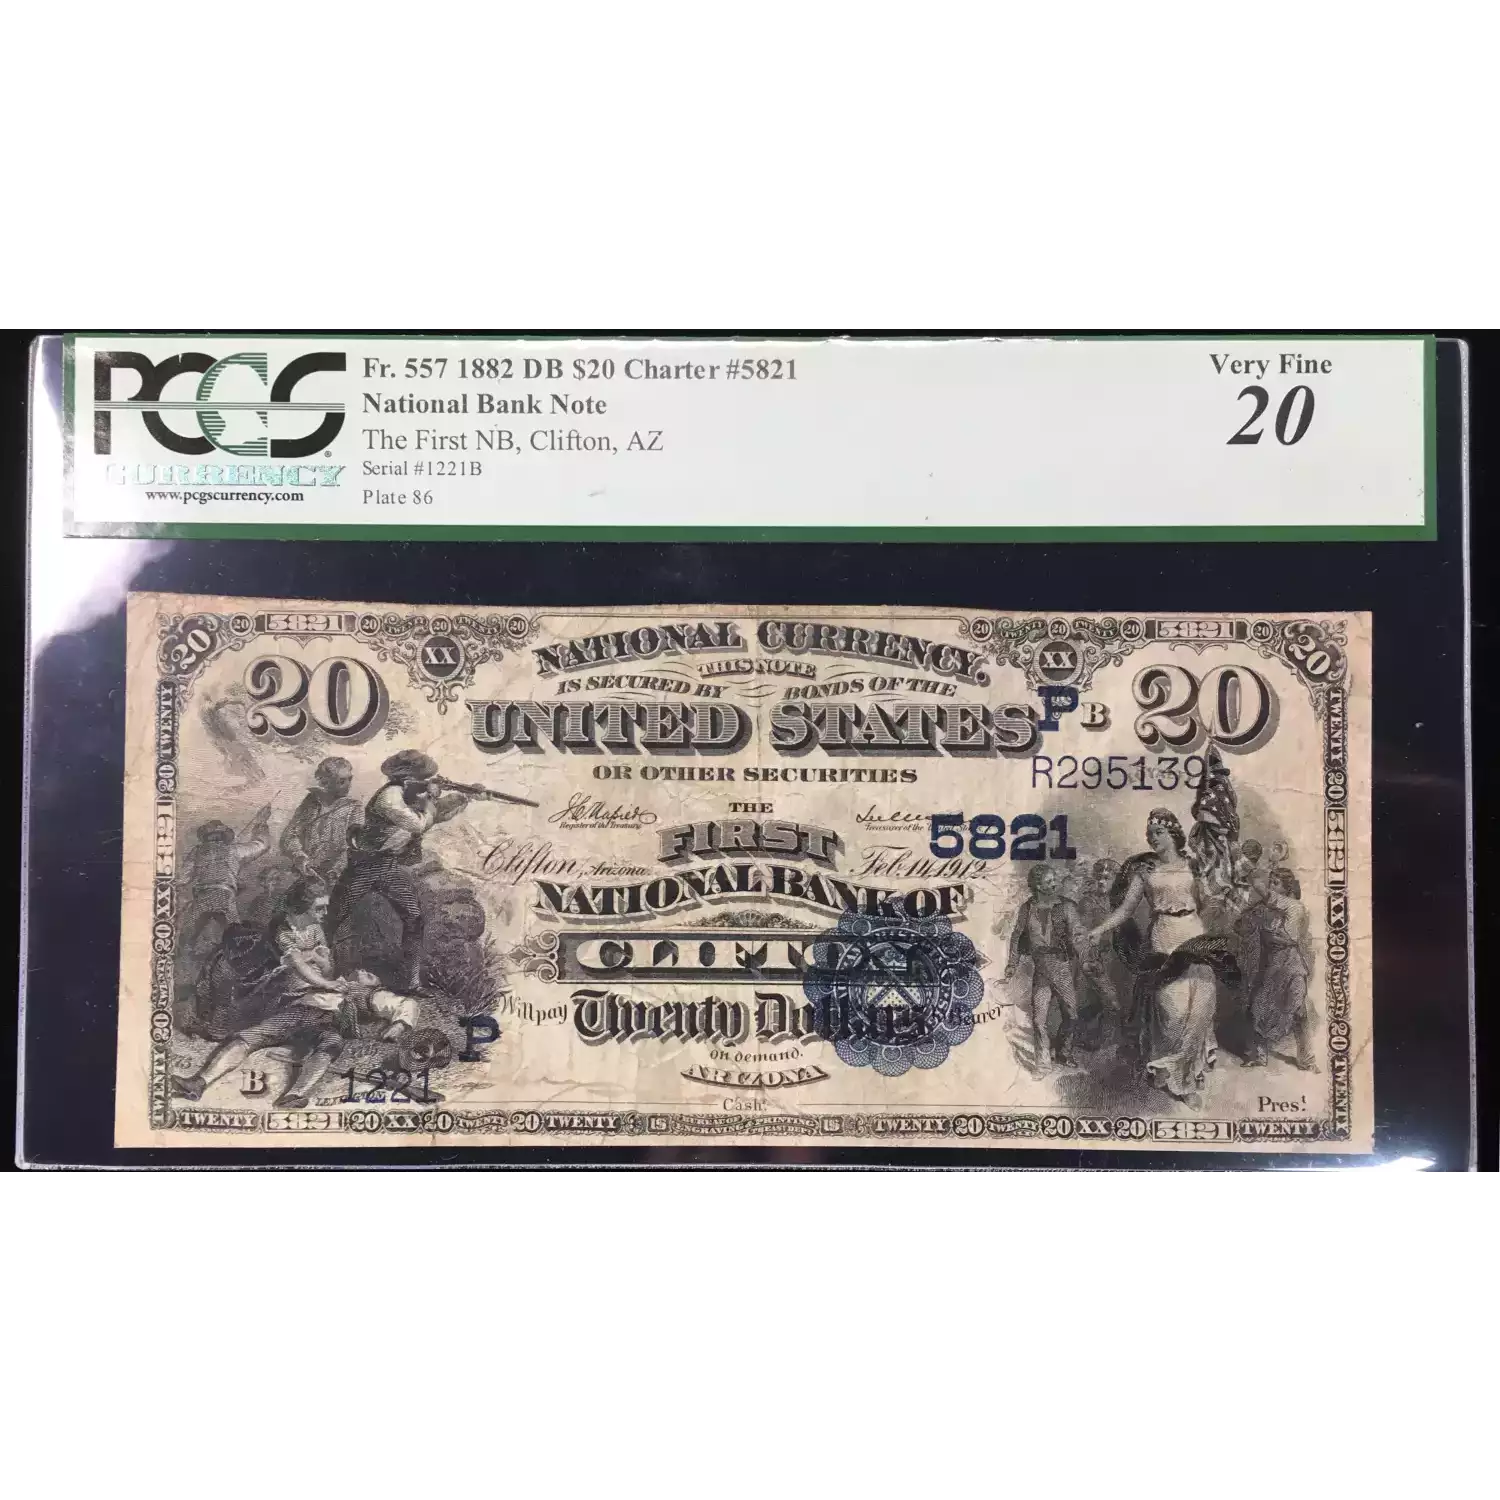 1882 DATE BACK $20 CLIFTON, AZ NATIONAL BANK NOTE #5821 – PCGS CURRENCY VERY FINE 20, small edge repairs